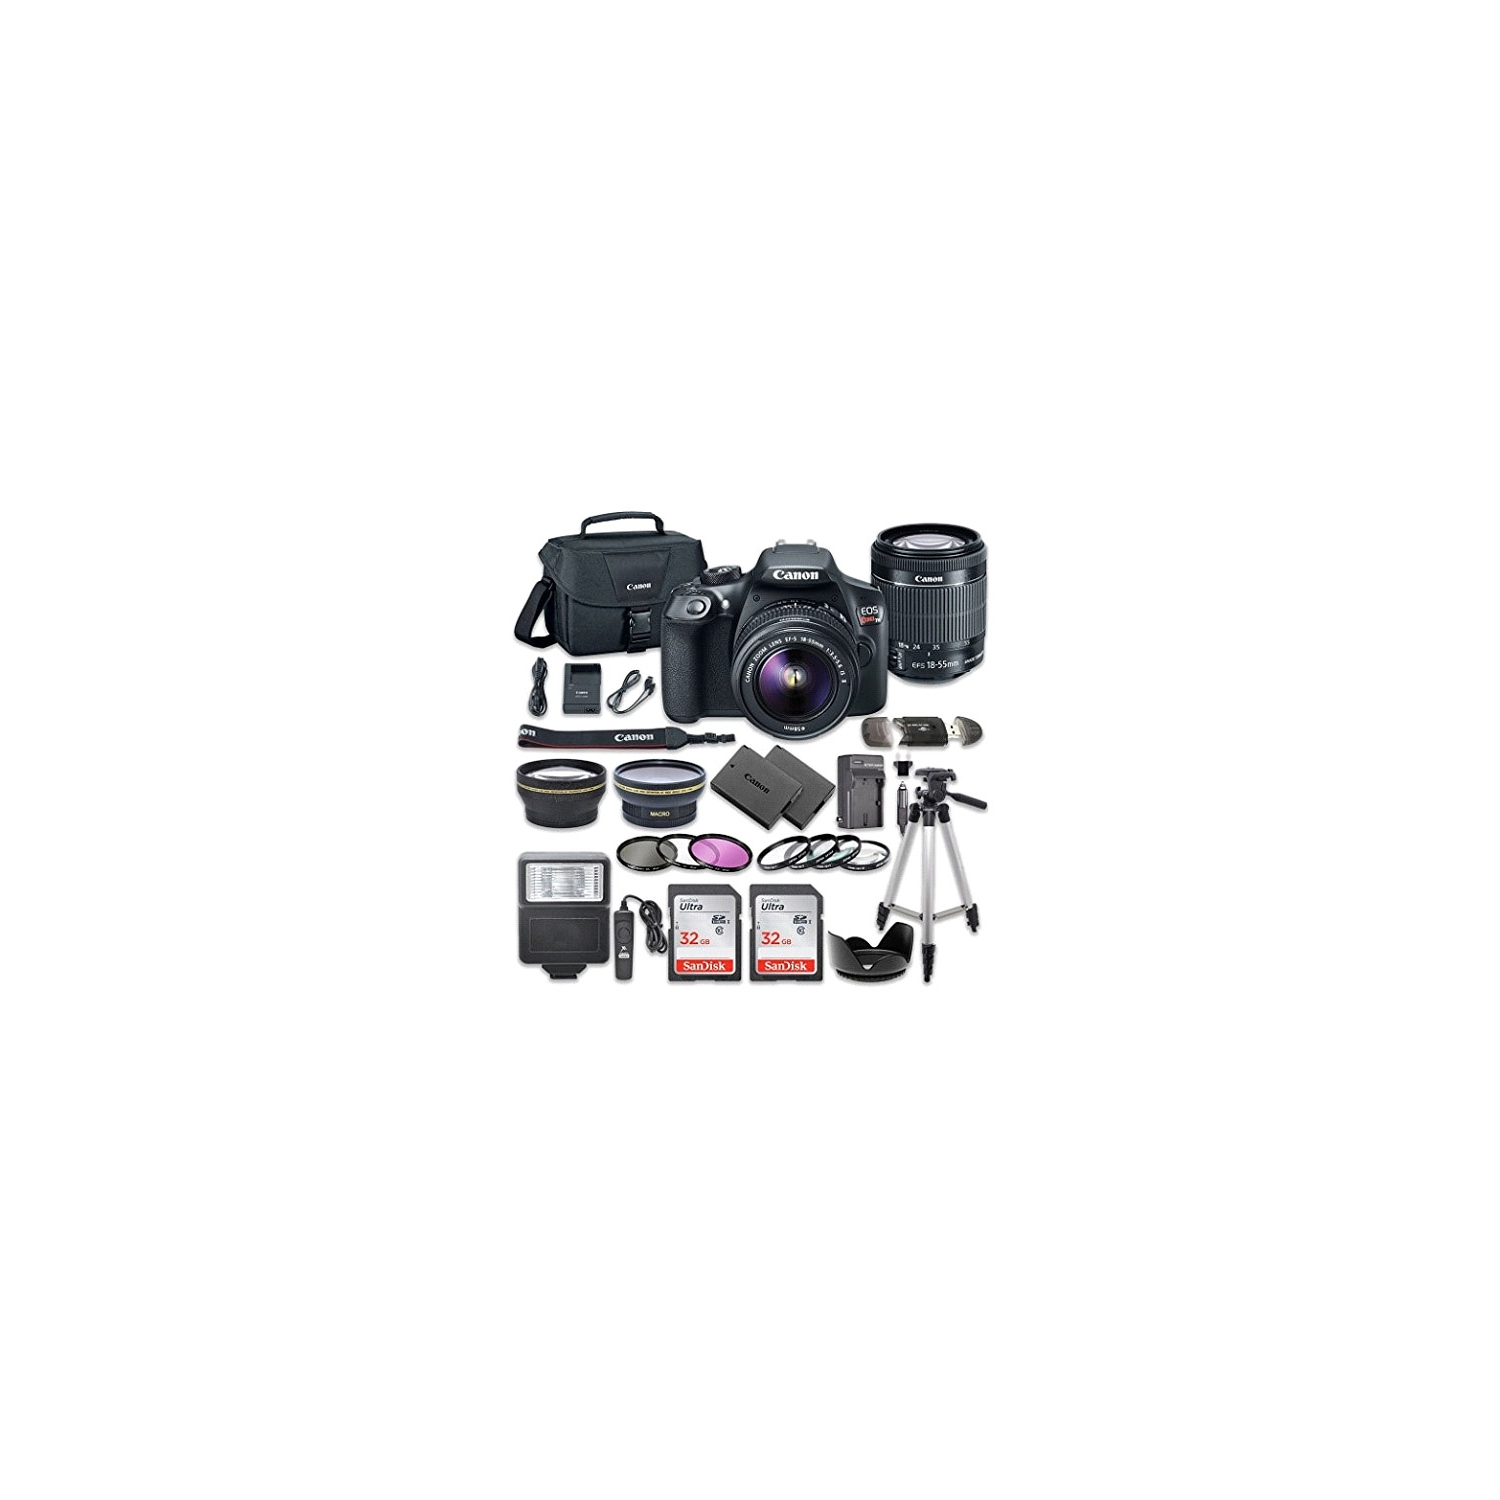 Canon EOS Rebel 1300D / T6 DSLR Camera Bundle with Canon EF-S 18-55mm Lens | 2pc SanDisk 32GB Memory Cards Accessory Kit - US Version w/ Seller Warranty